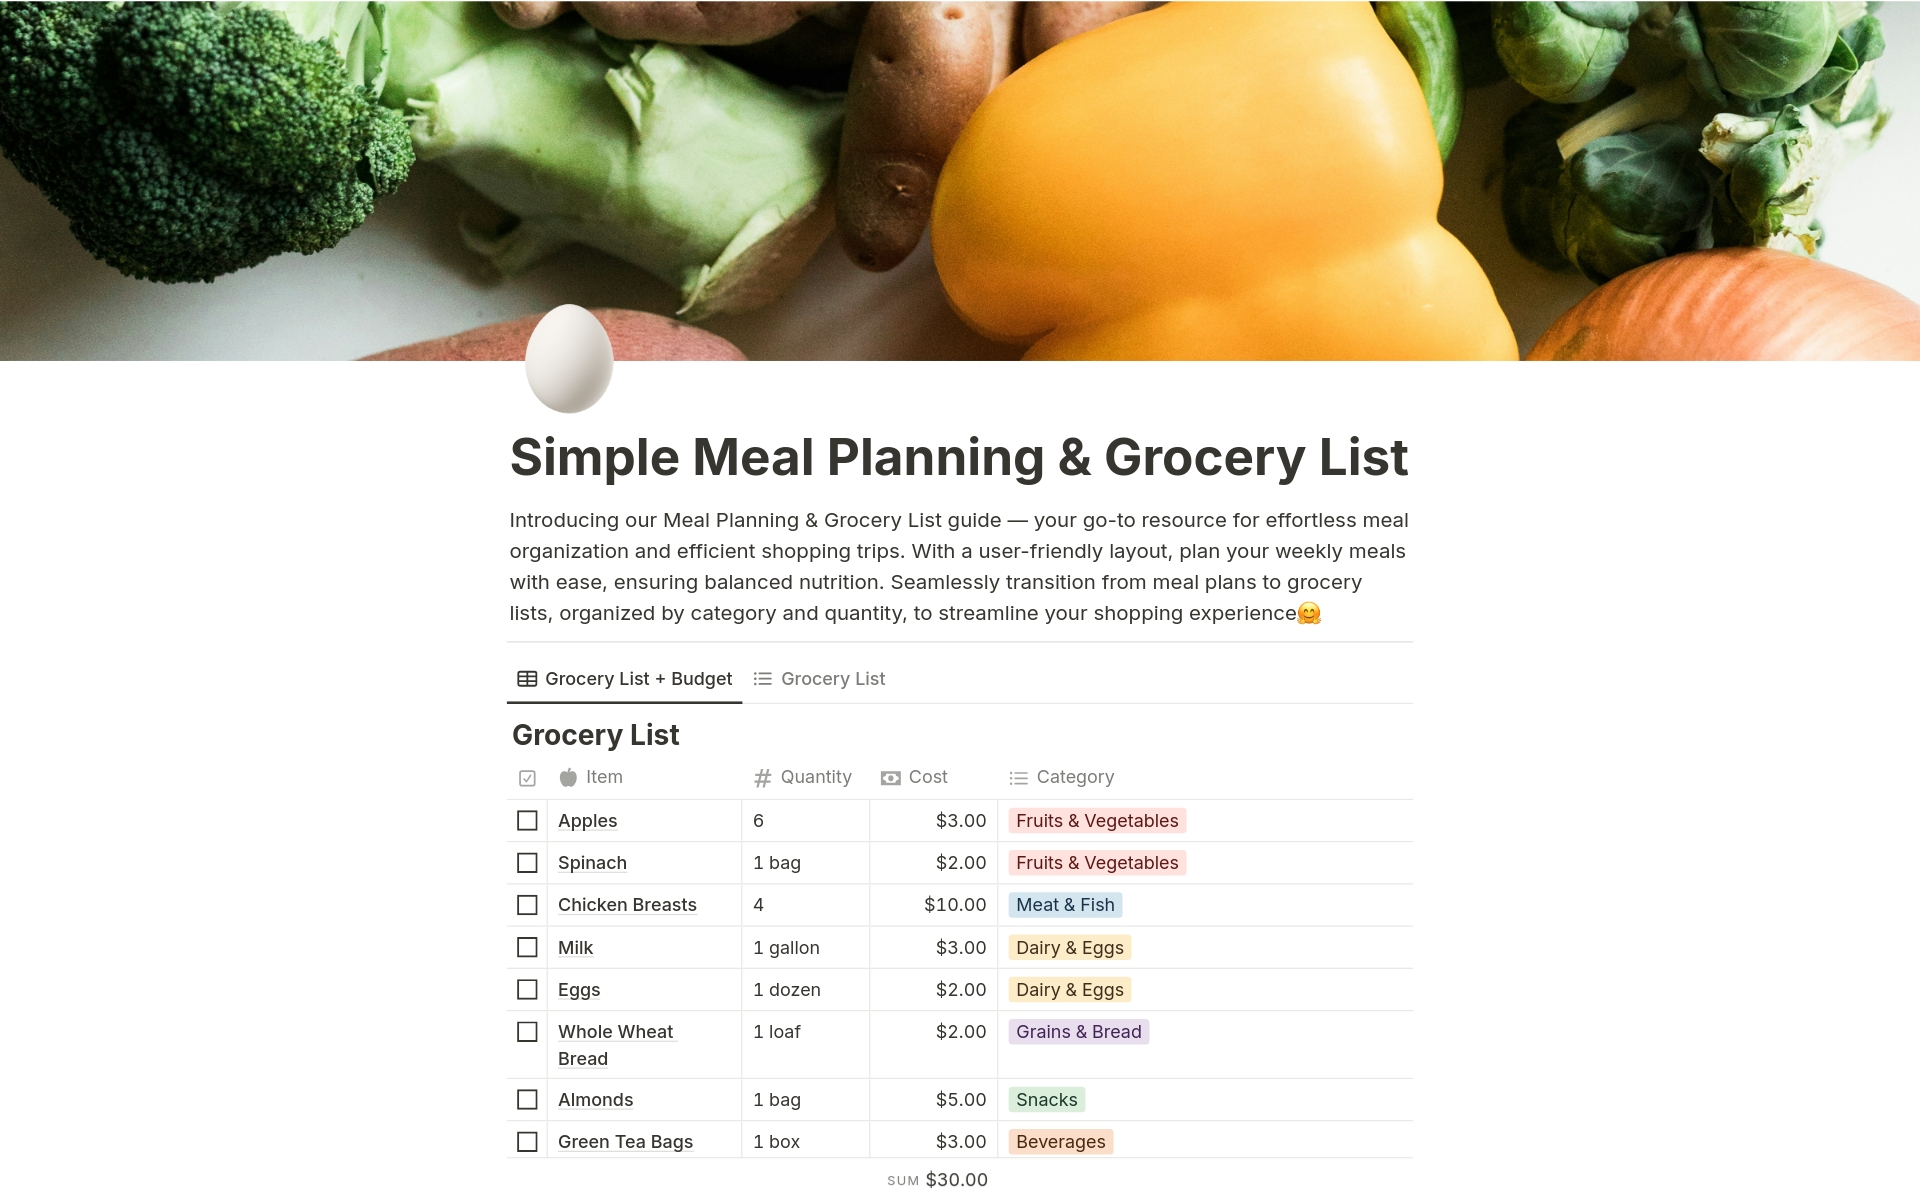 Simple Meal Planning & Grocery List のテンプレートのプレビュー